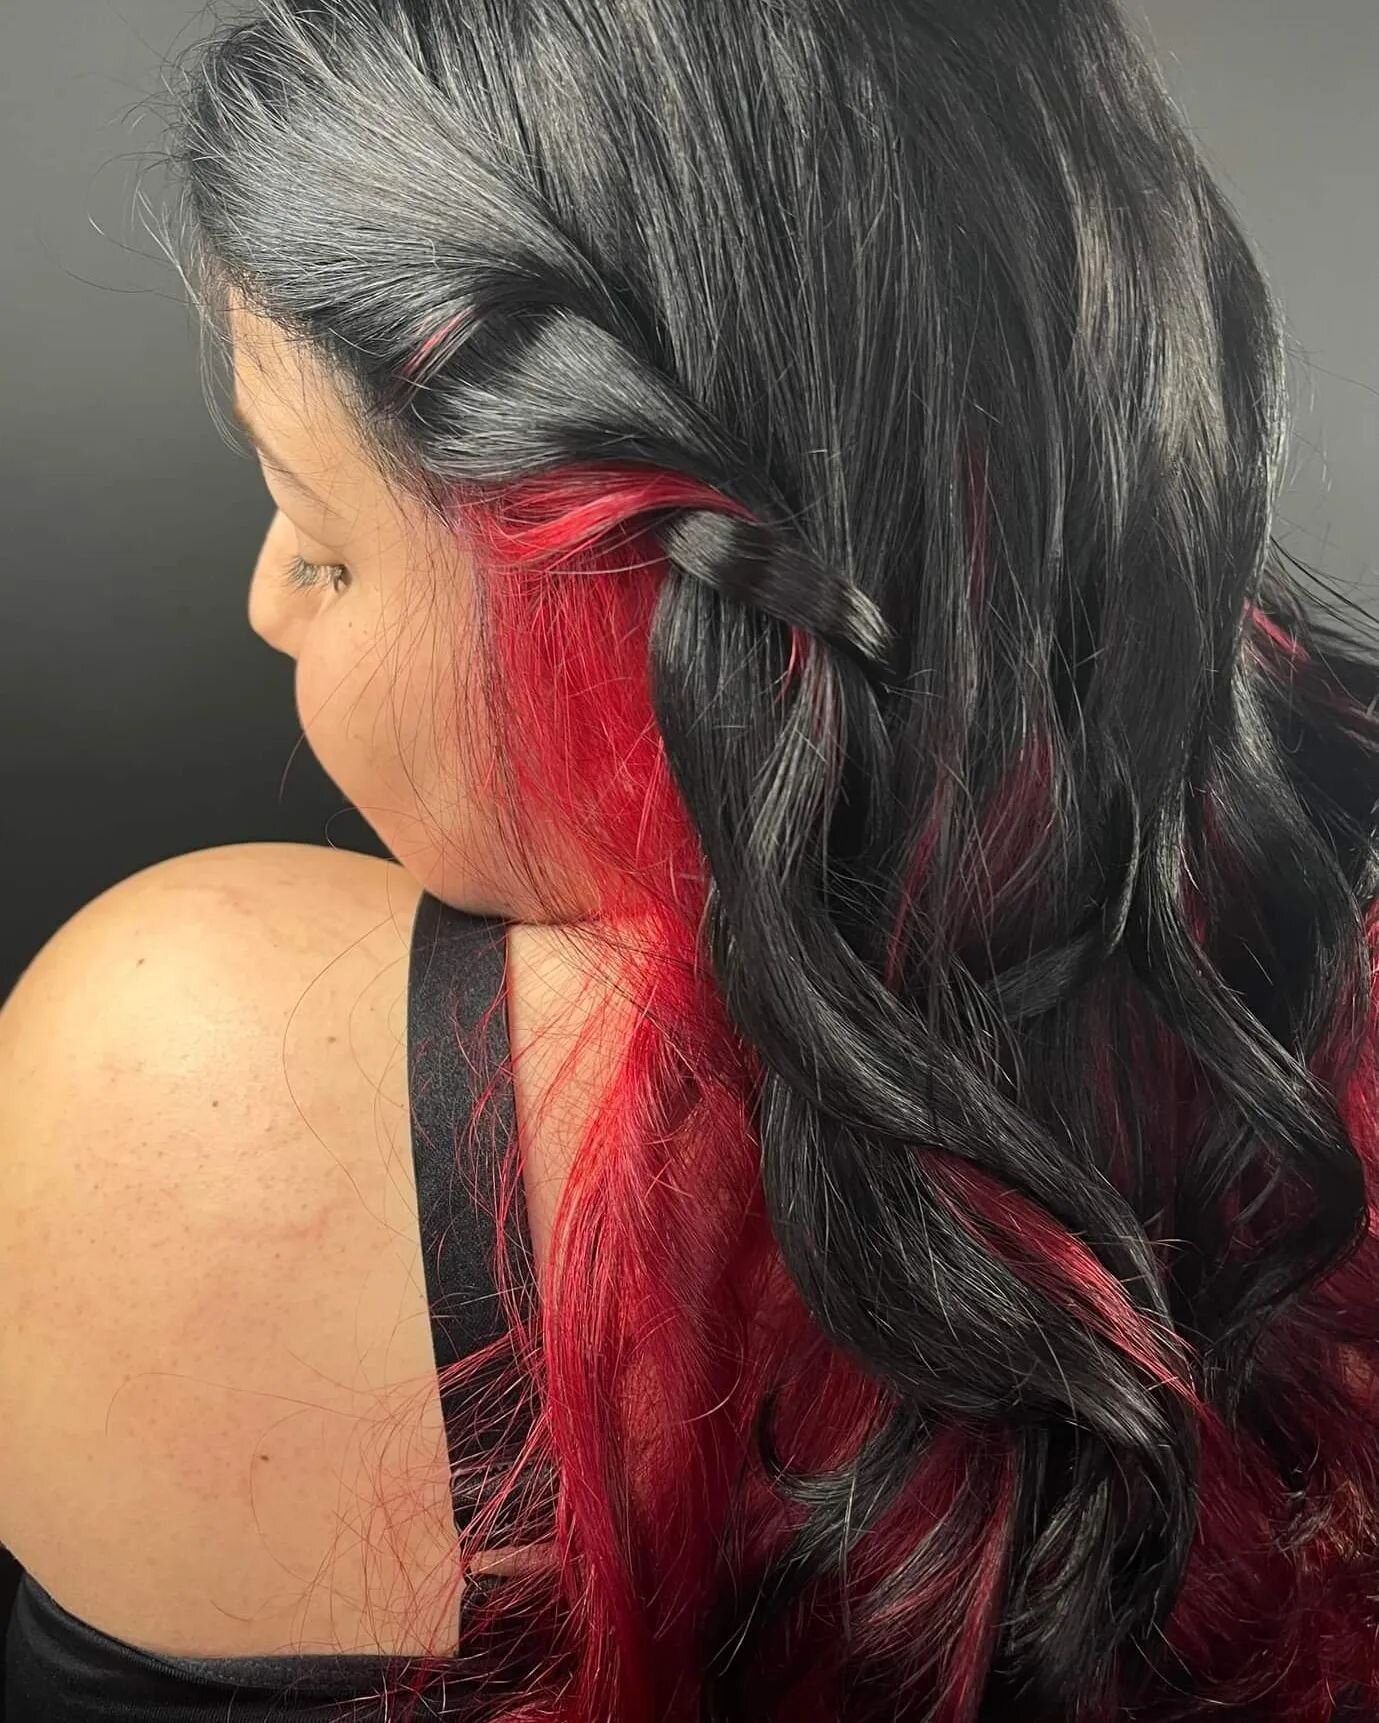 Was able to give my girl her 1st vivid hair color last night and we are both so happy with it!!🍒❤️😍
 The look on her face lighting up as she looked in the mirror after made everything worth it and is why I love doing hair!!❤️❤️❤️
@alexa.maria.h

#r